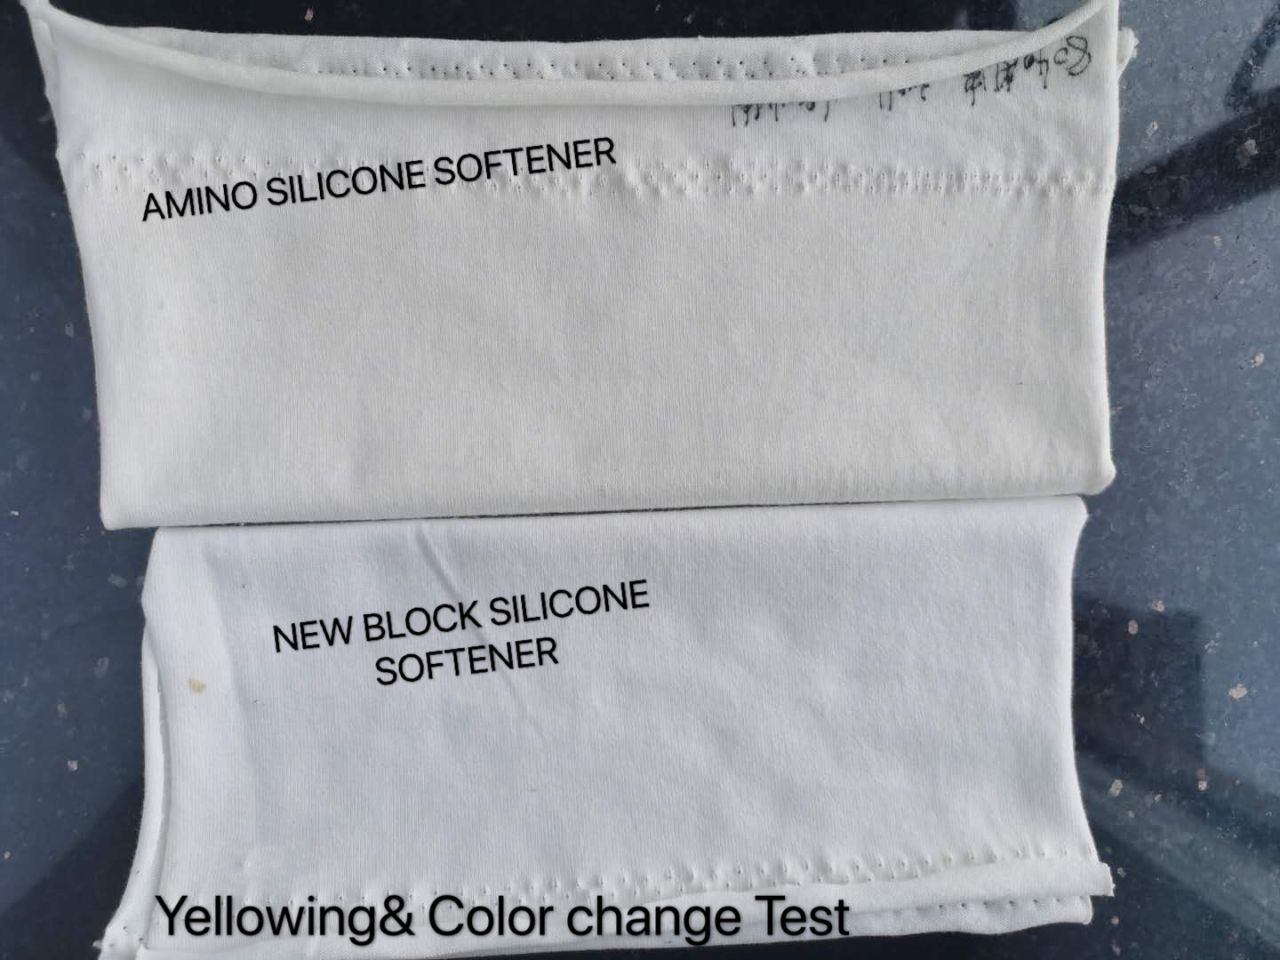 What are properties of New Block Silicone Softener？